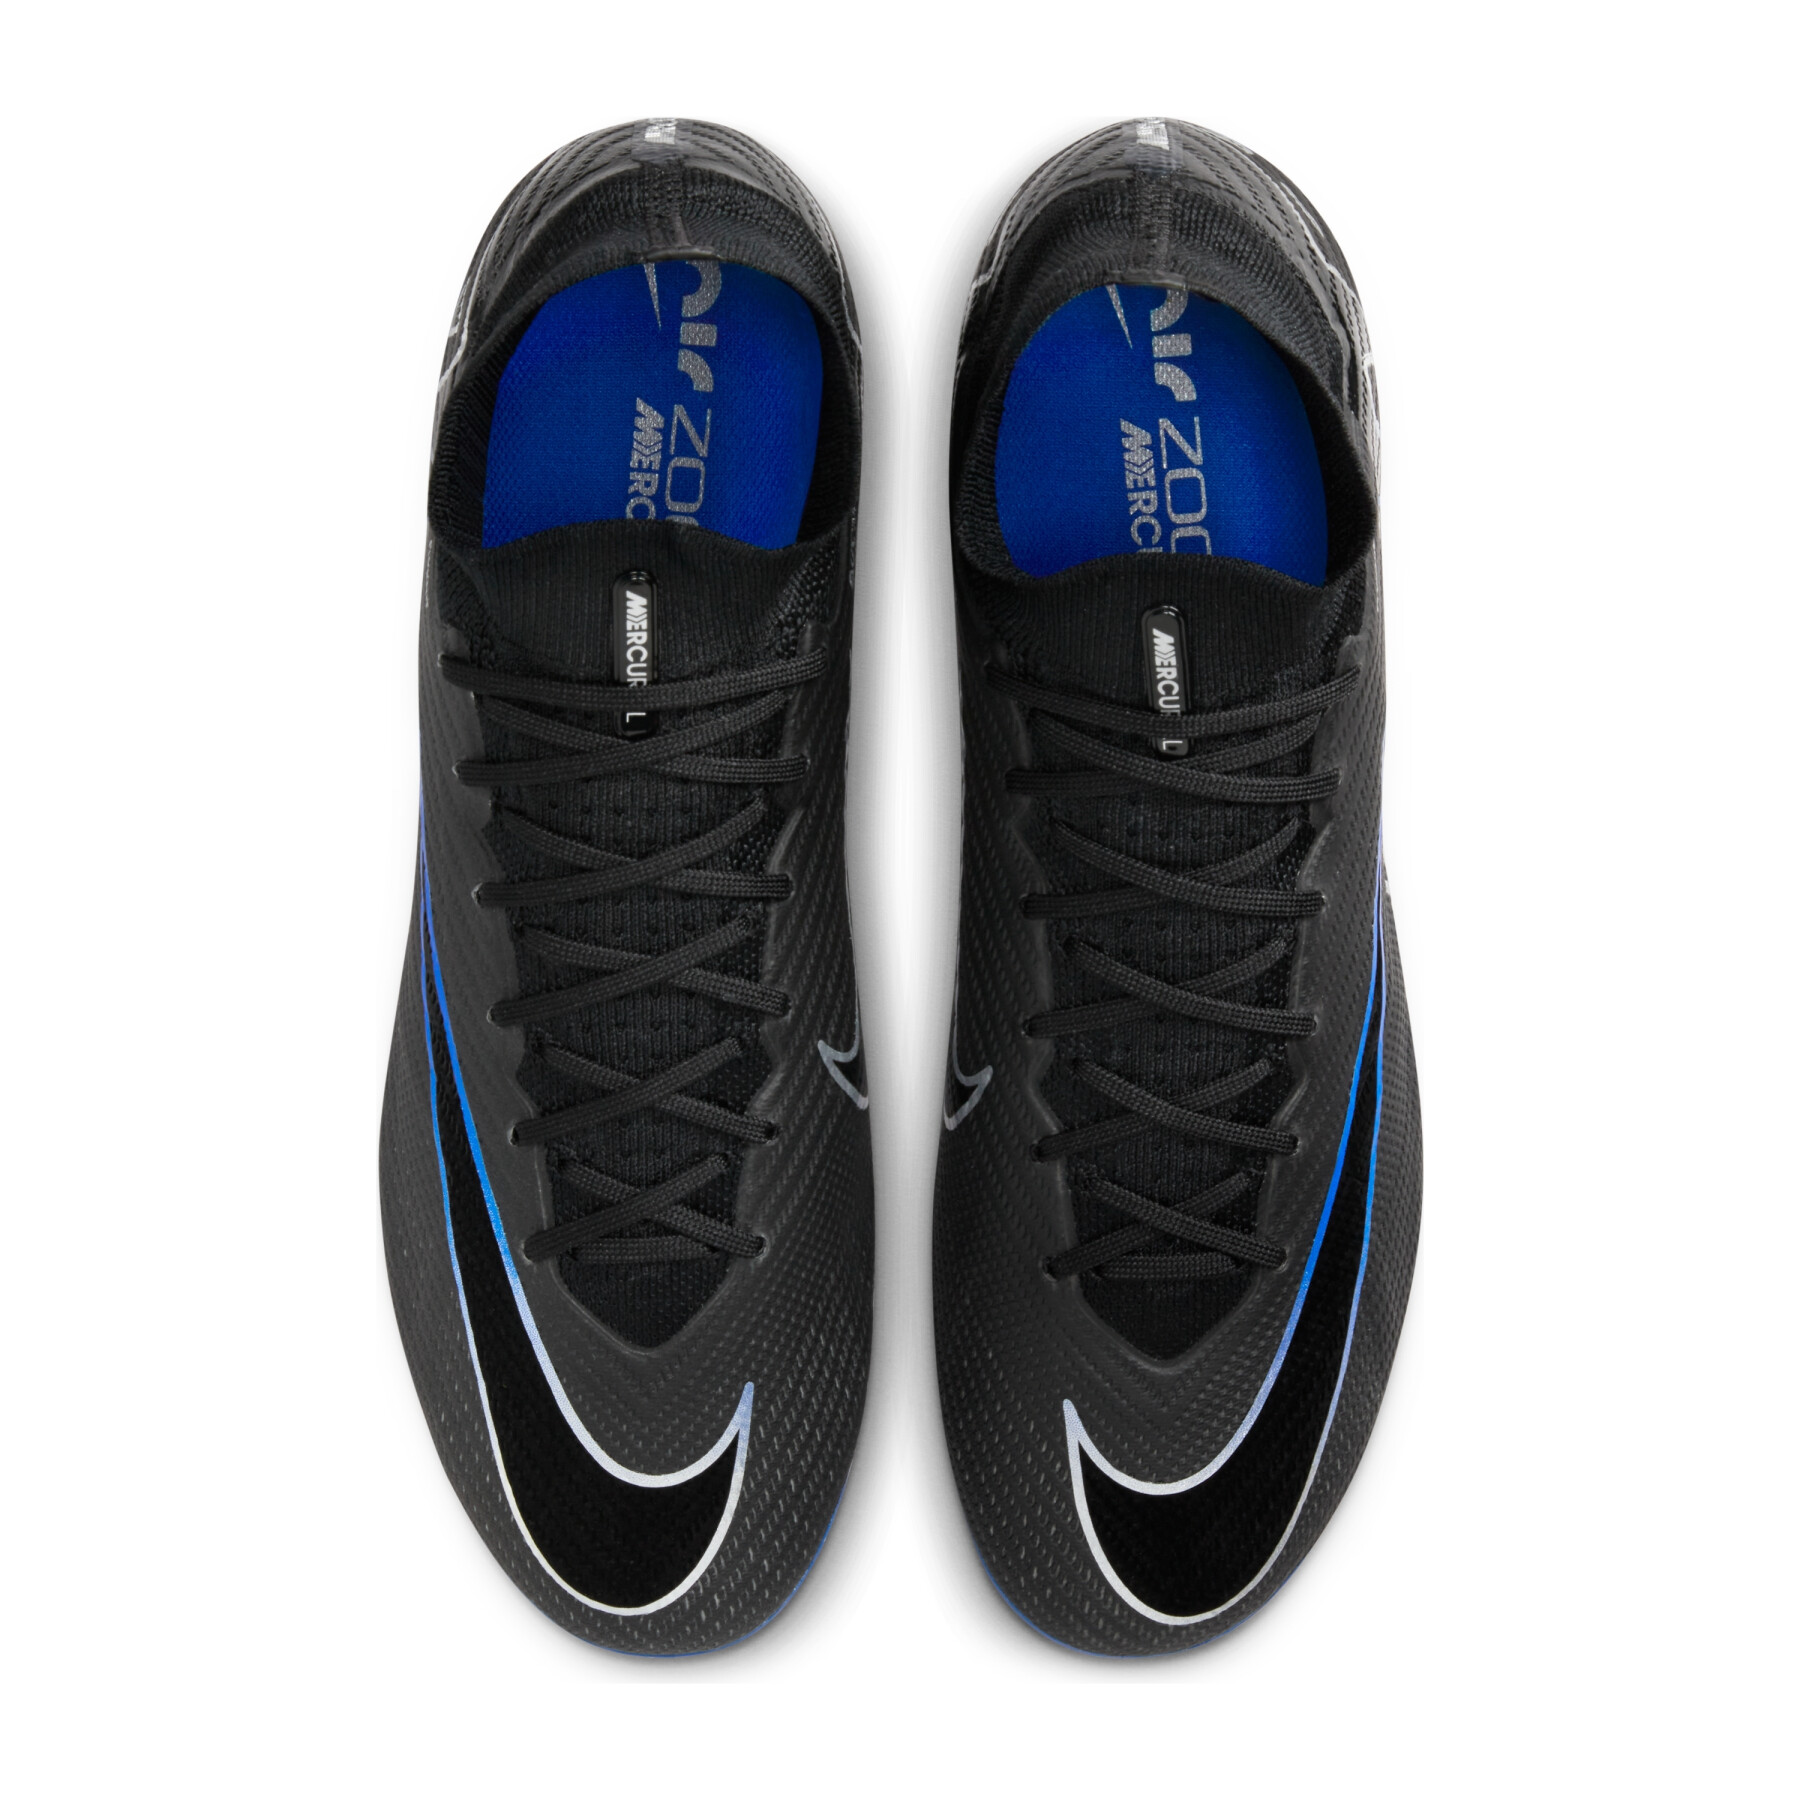 Chaussures de football Nike Zoom Mercurial Superfly 9 Elite AG-Pro